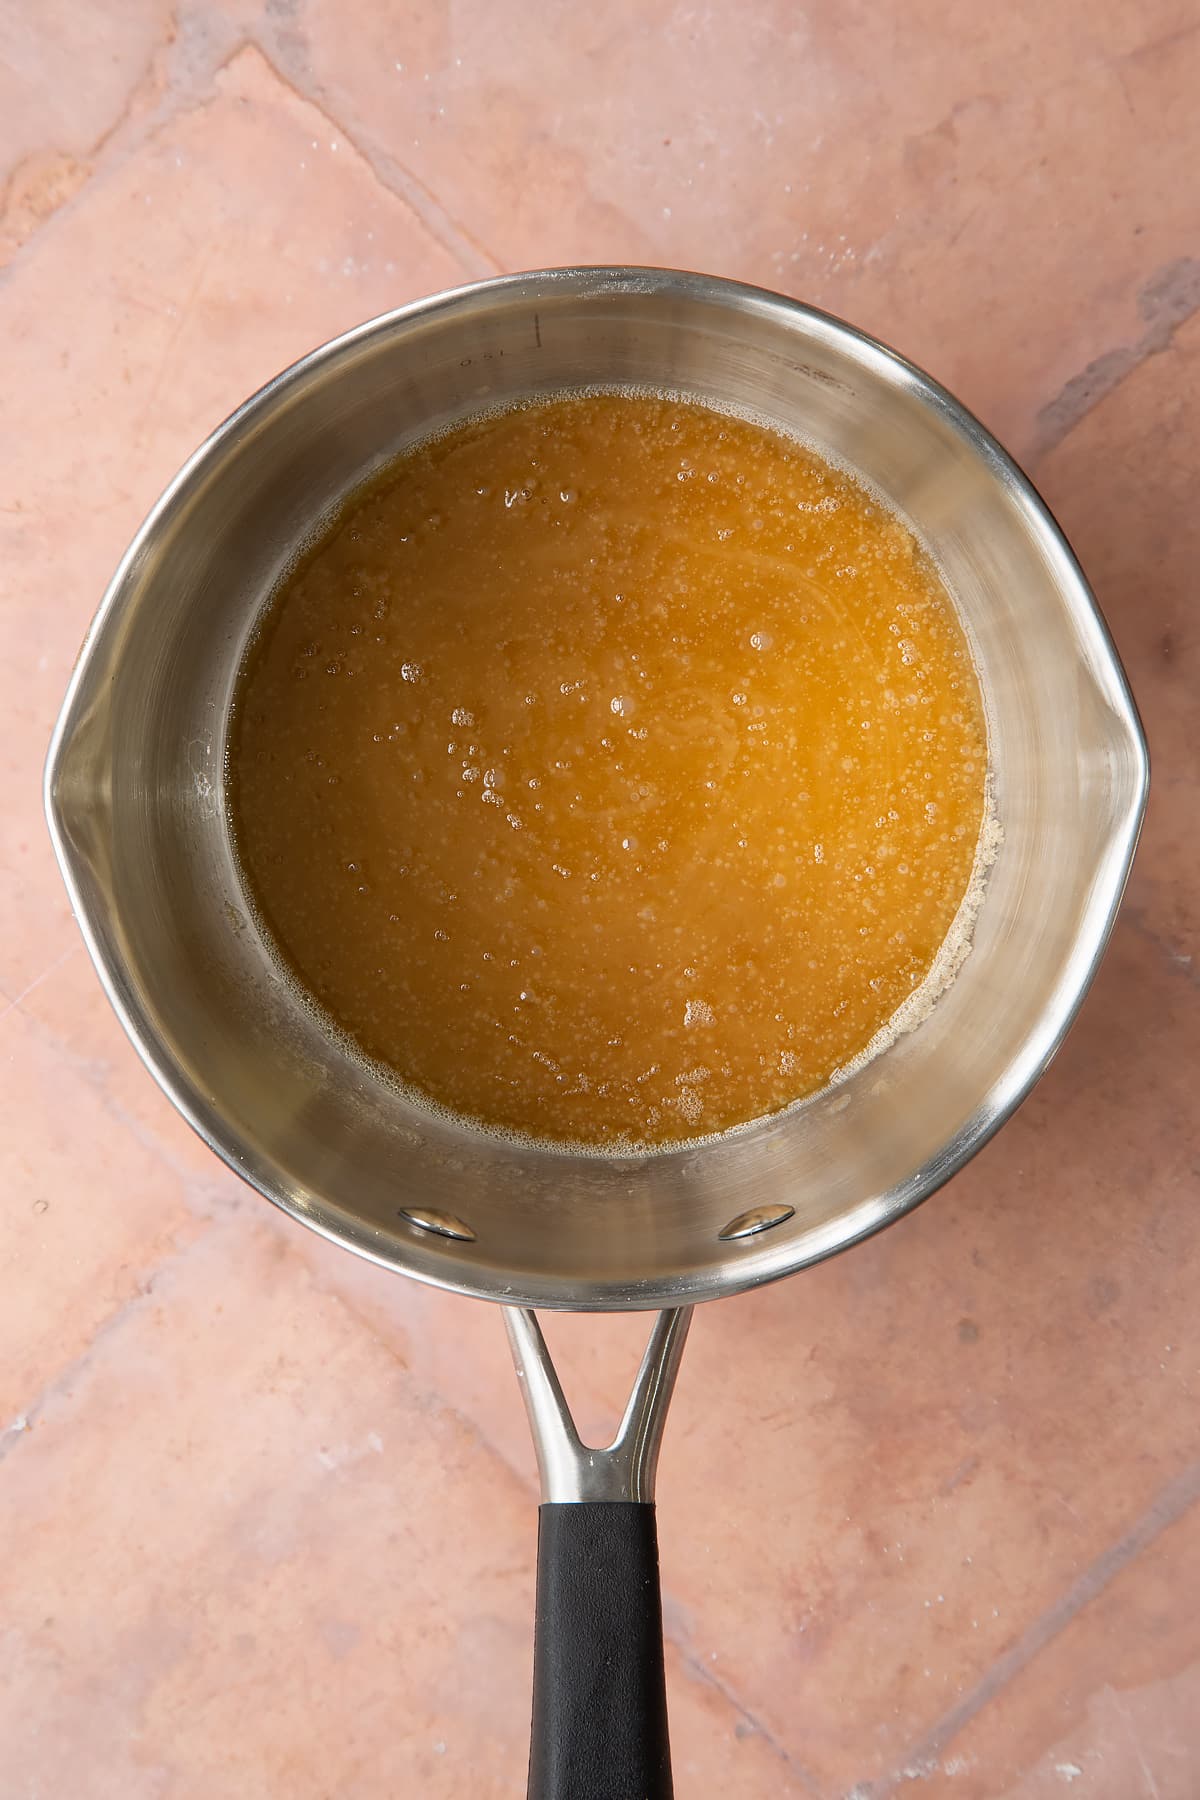 melted butter and sugar mix in a small saucepan.